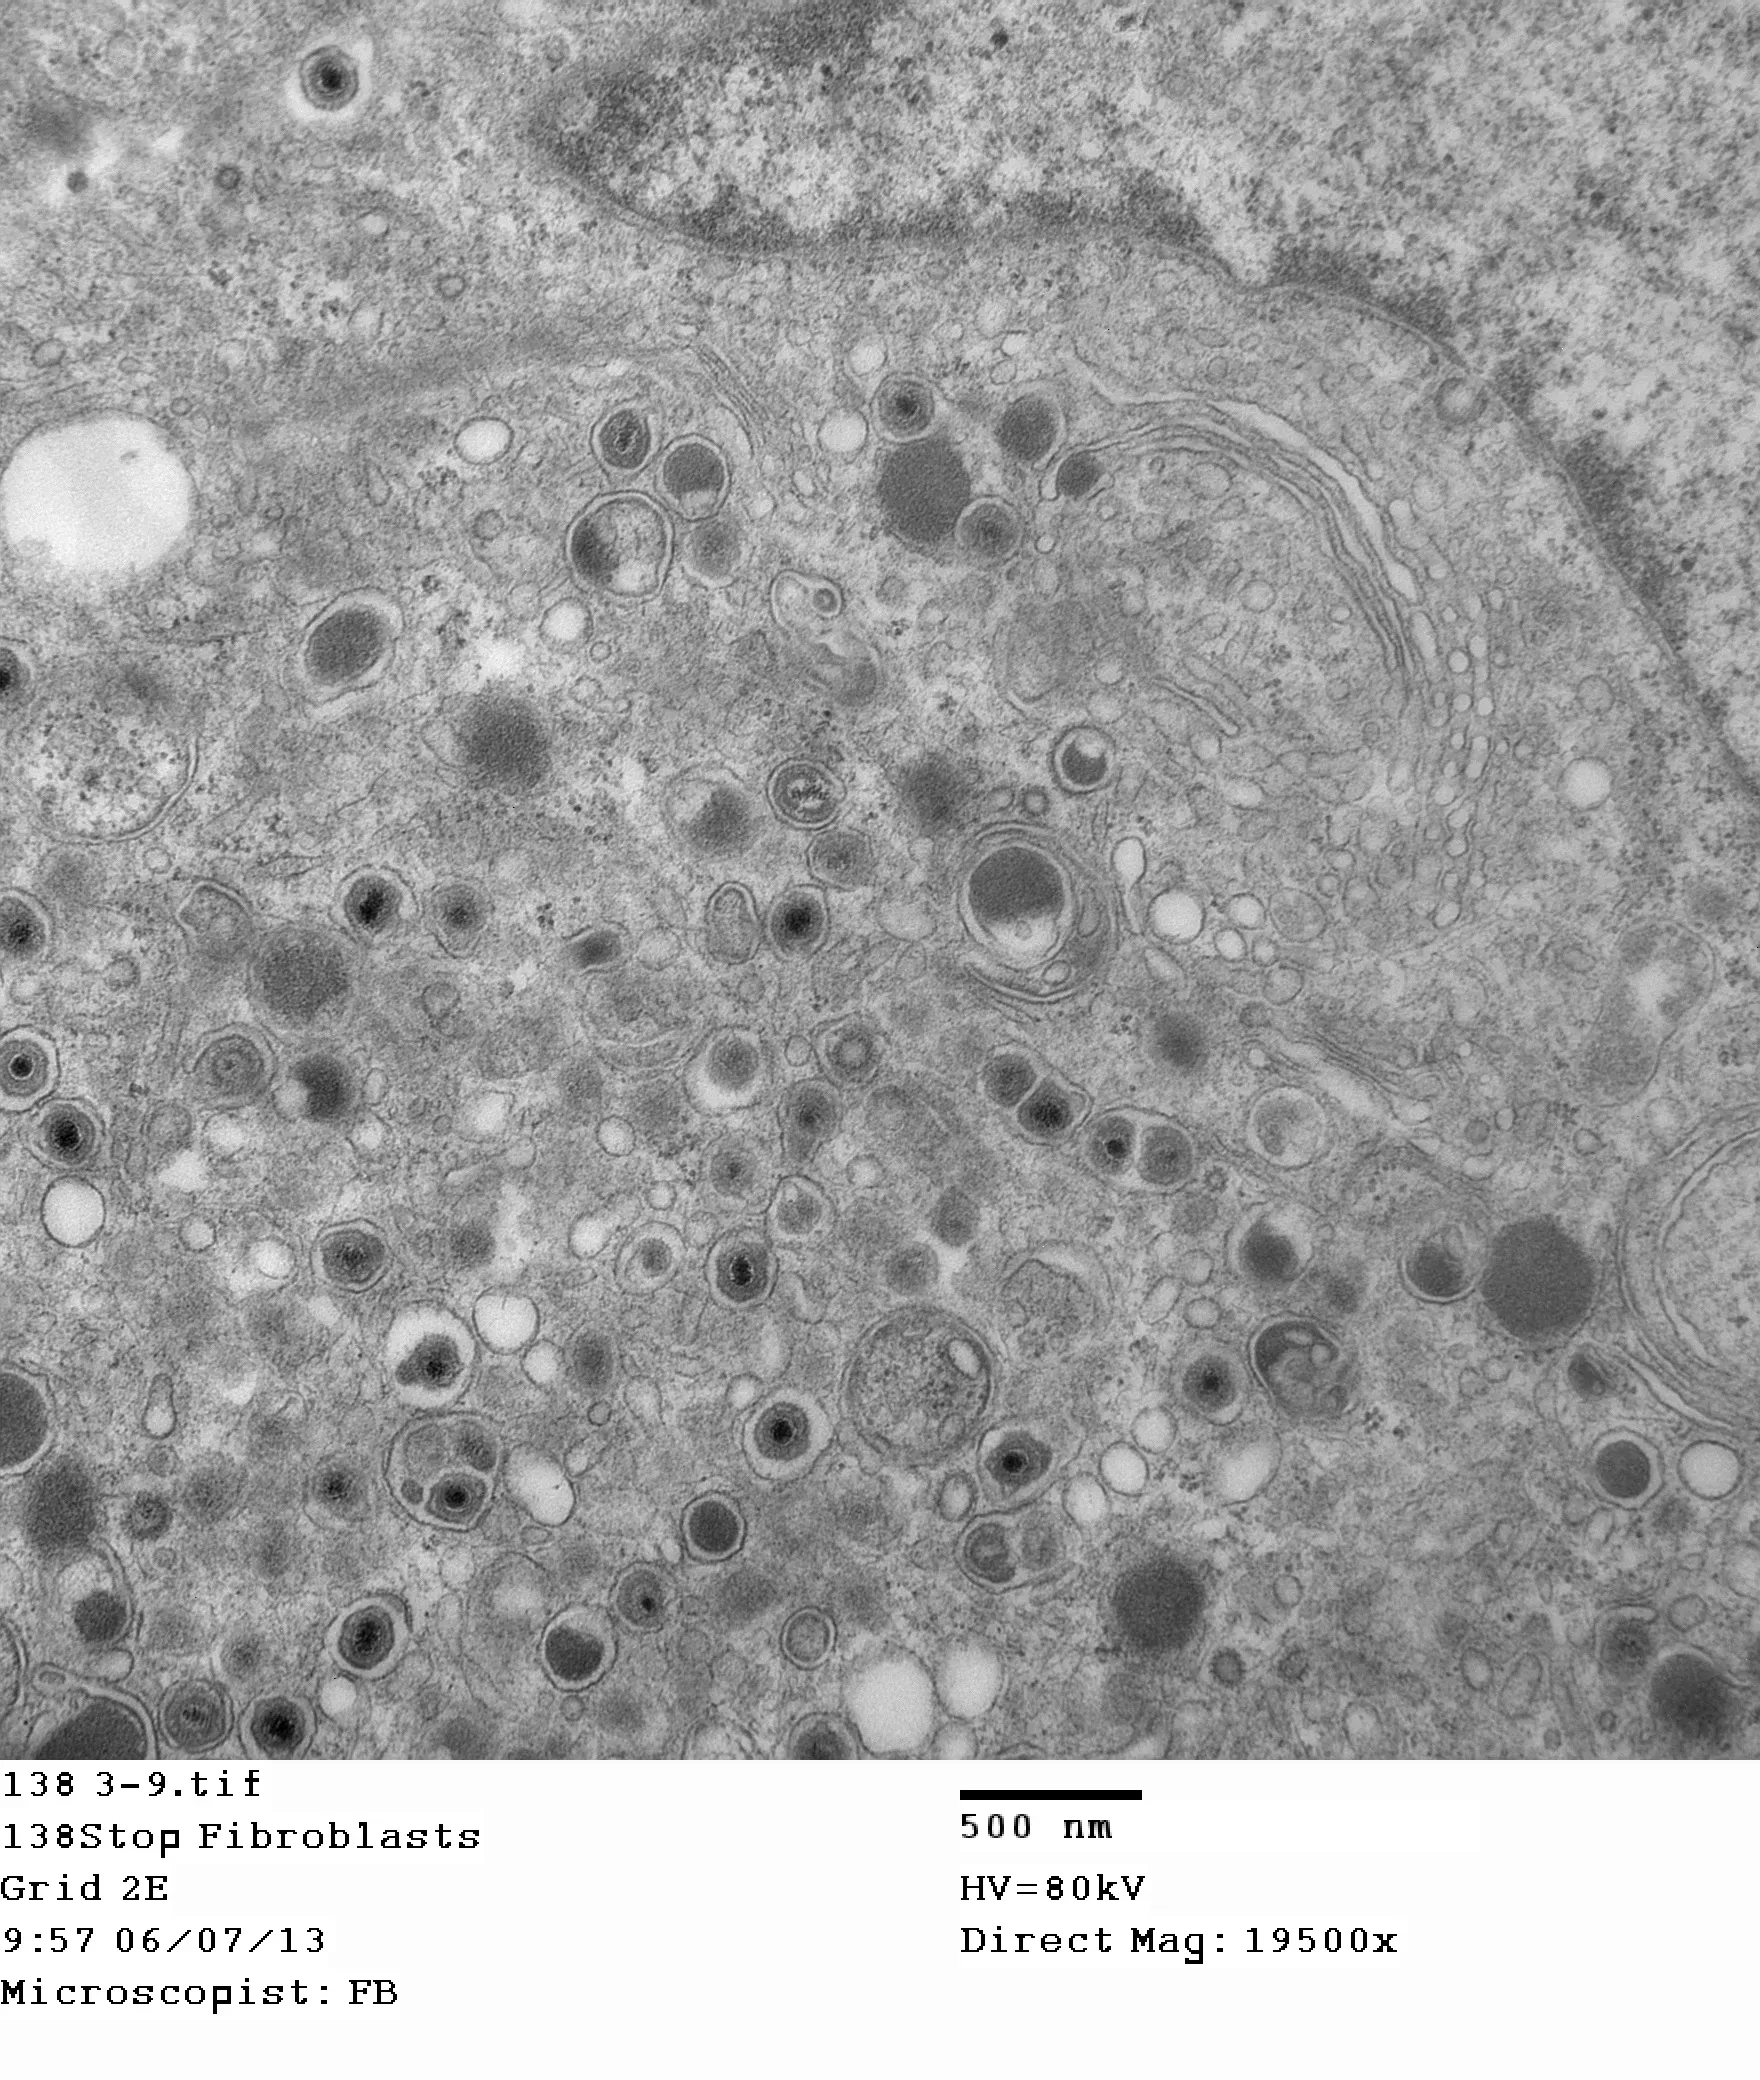 This image, taken using an electron micrograph, shows a CMV infection inside a cell. The circles with black dots in the middle are the virus particles.